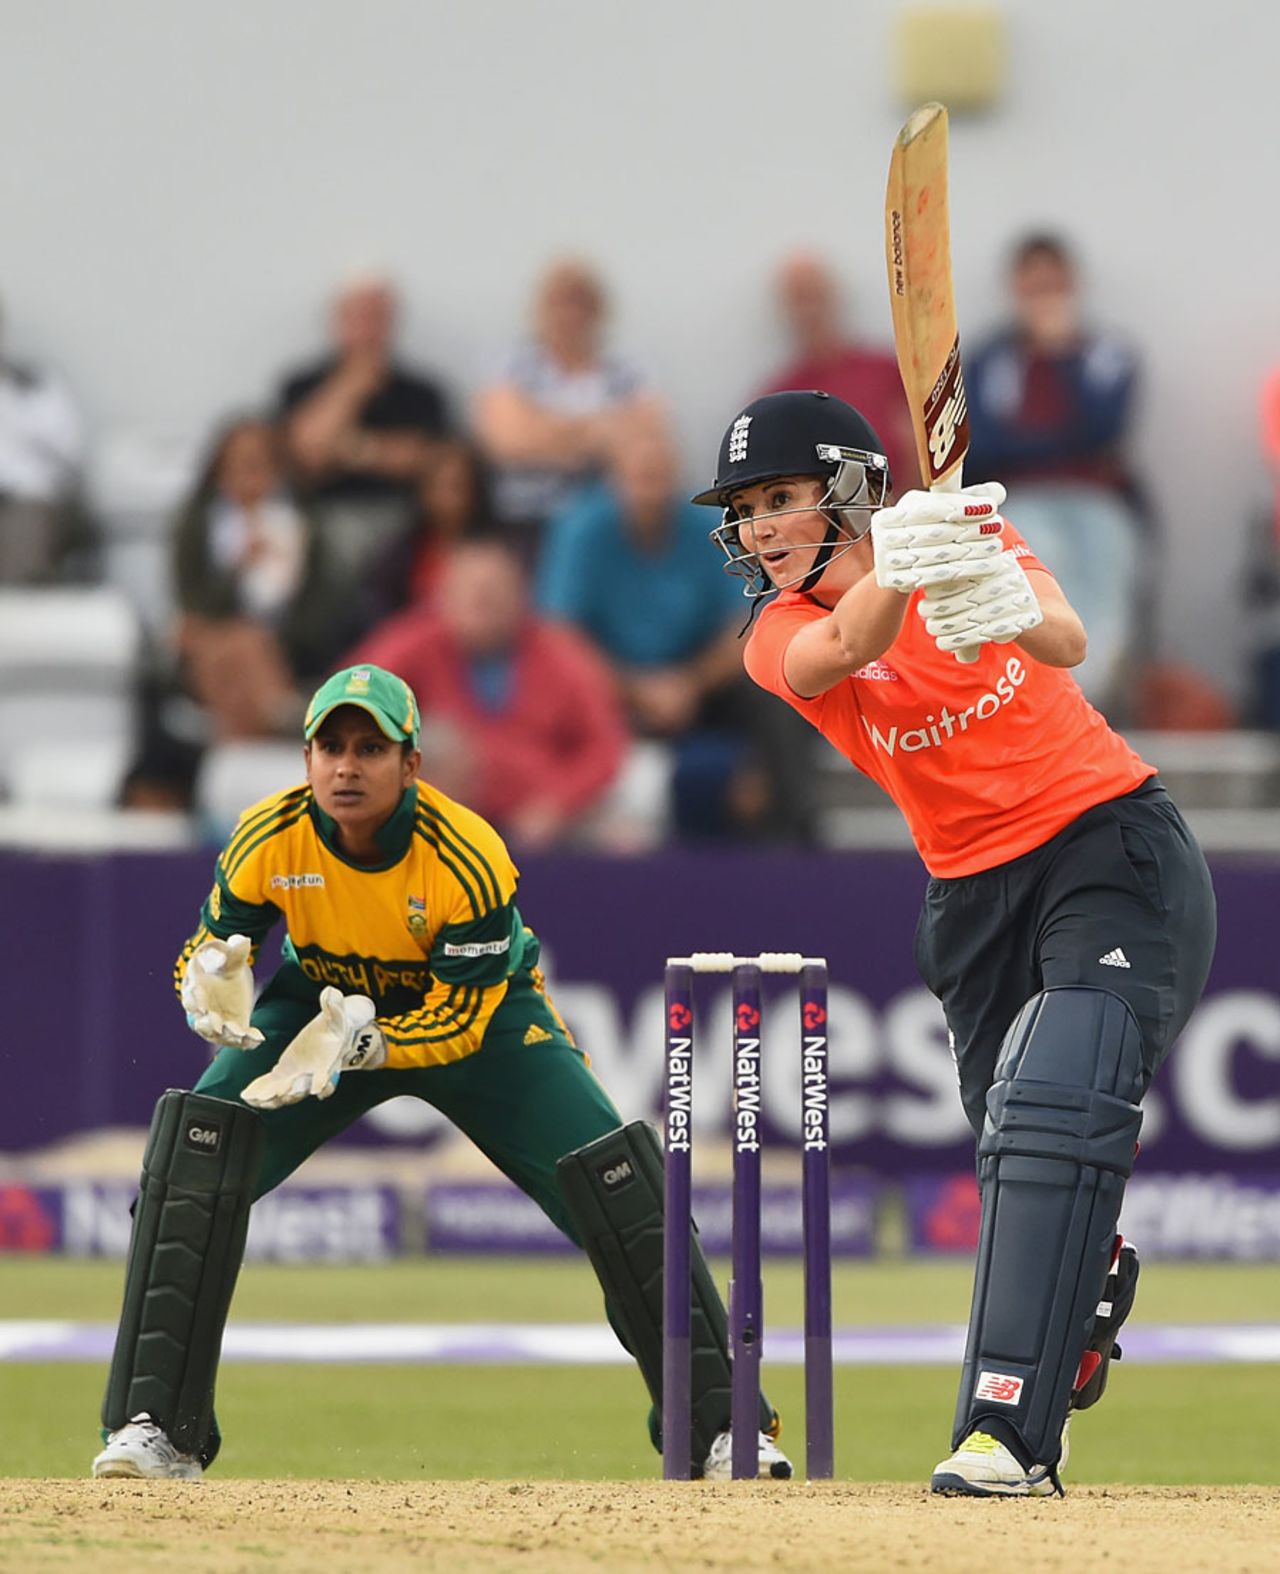 Charlotte Edwards outstanding form continued with an unbeaten 75, England v South Africa, 2nd women's T20, Wantage Road, September 3, 2014